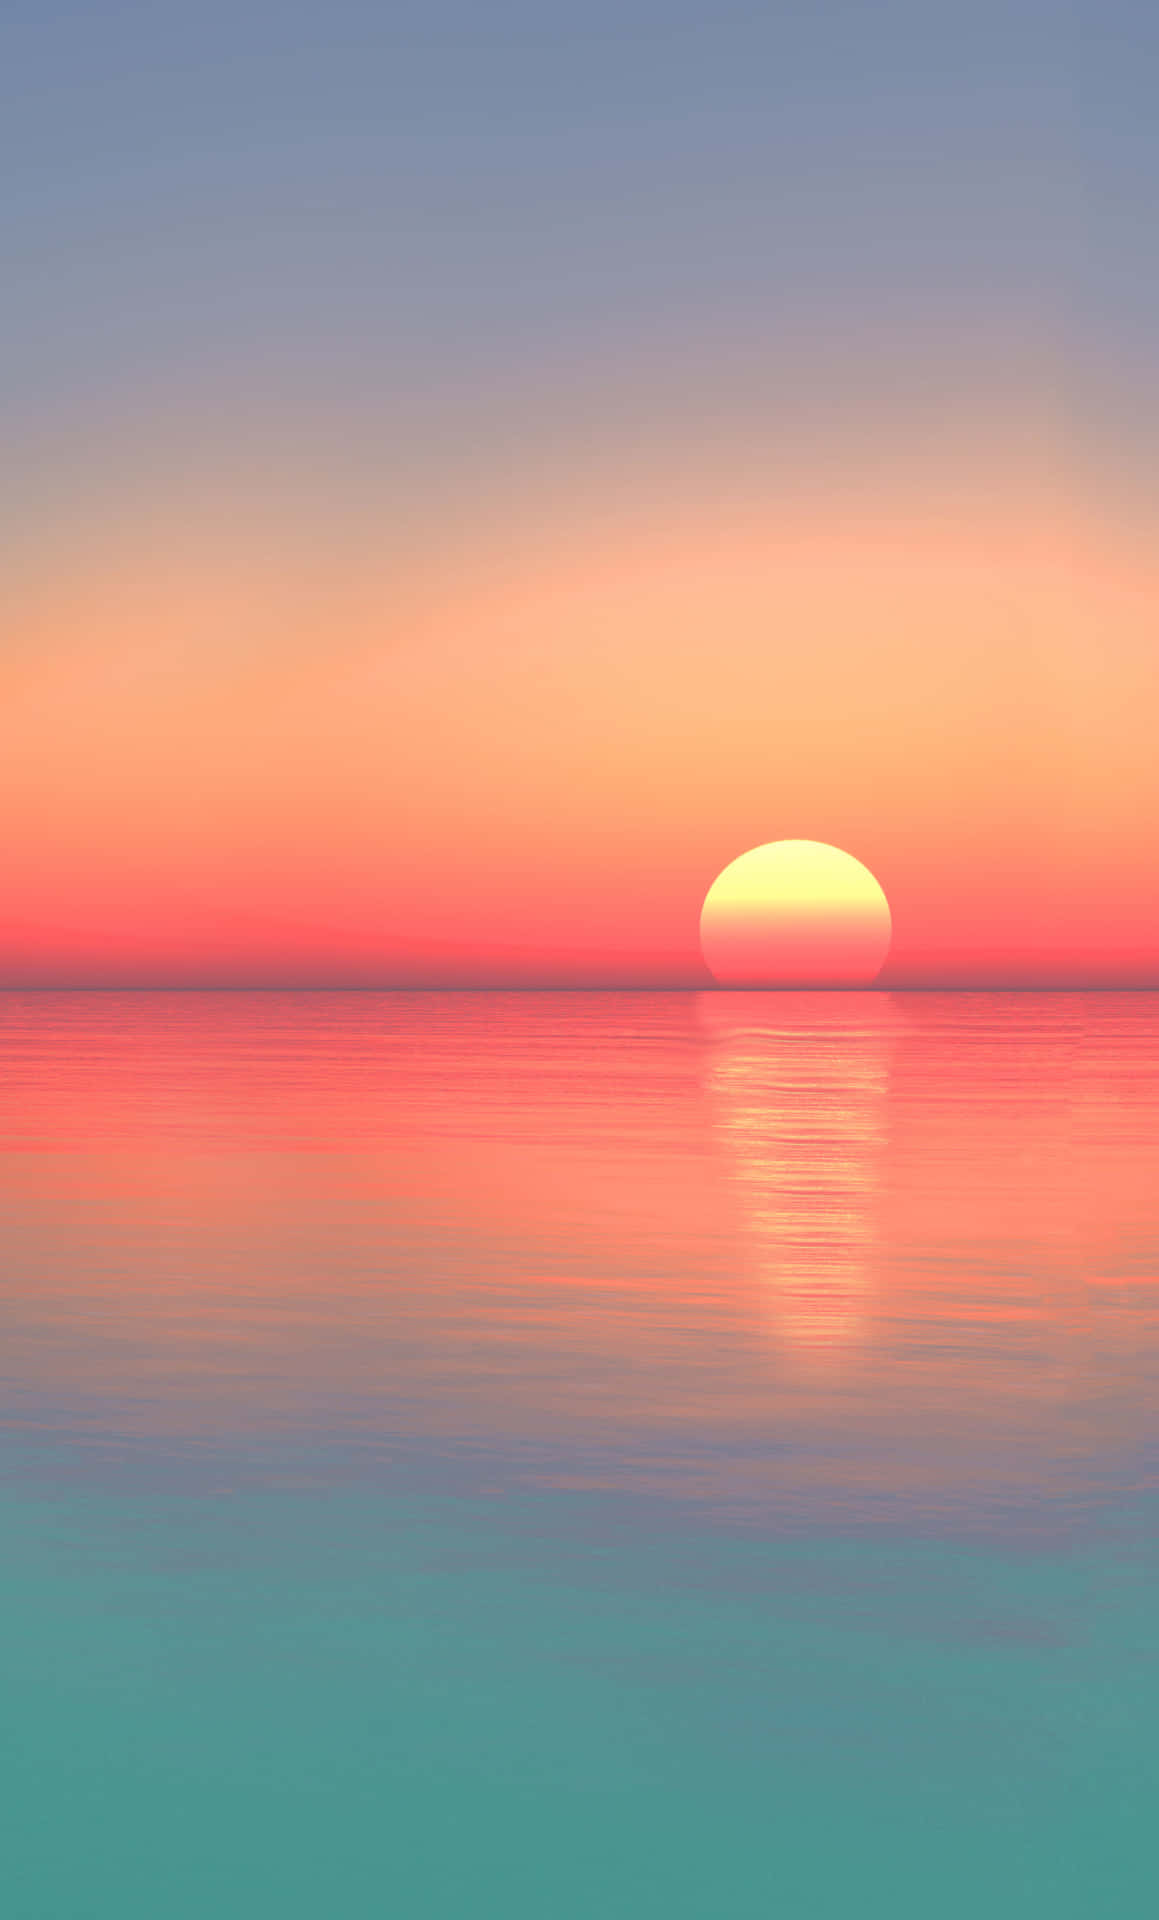 Sunset Over Calm Body Of Water 4K Phone Wallpaper